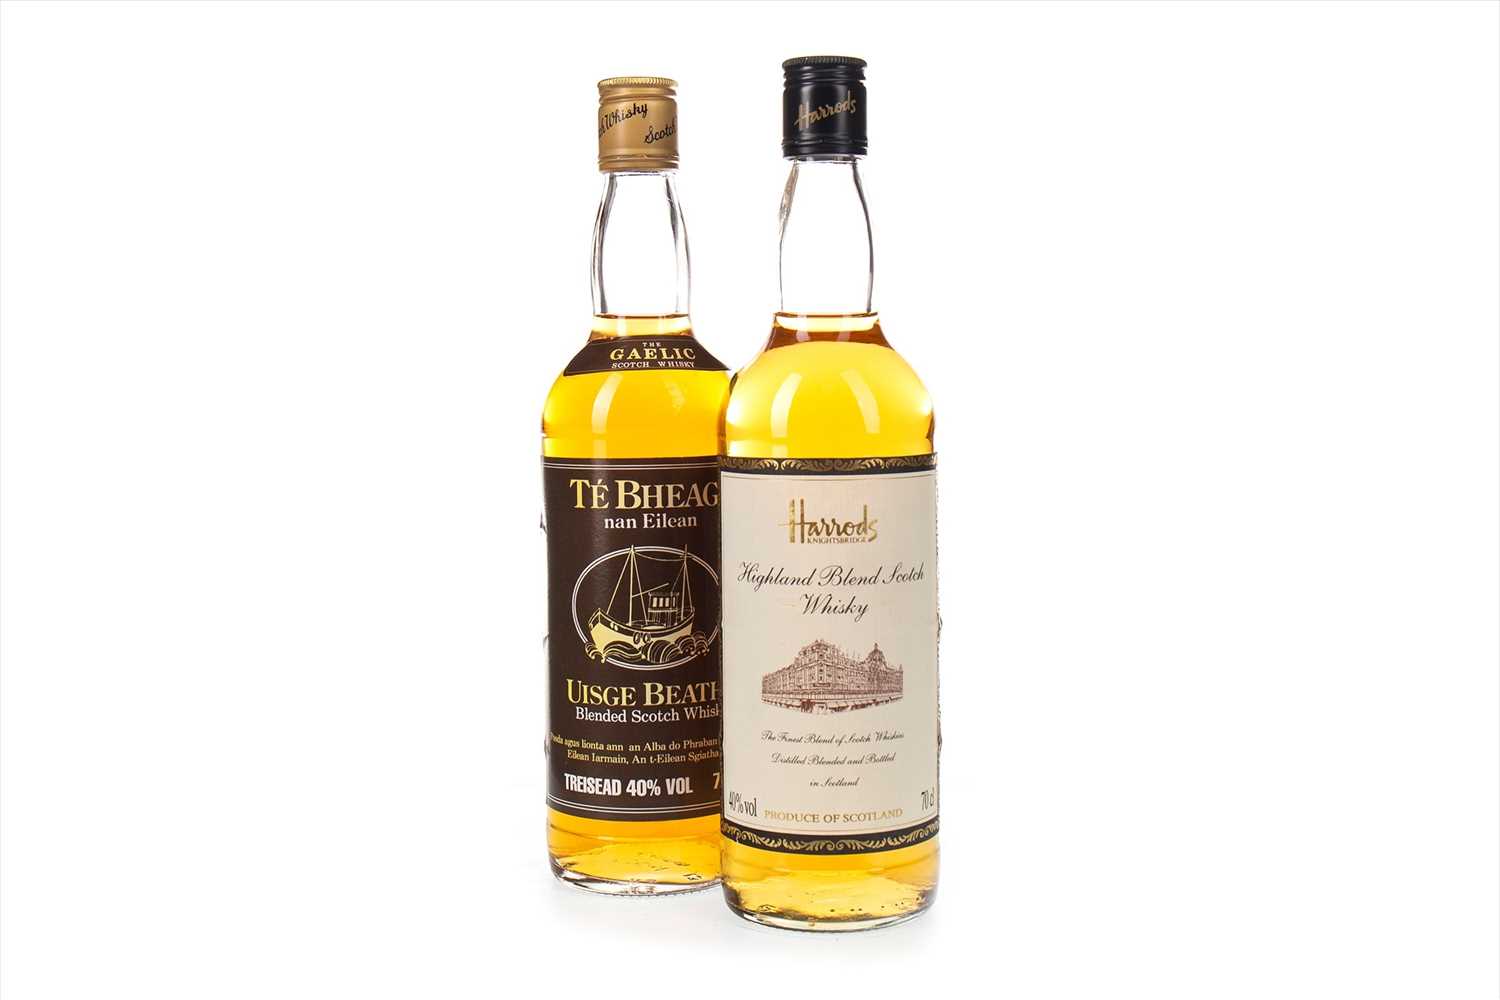 Lot 414 - TE BHEAG AND HARRODS HIGHLAND BLEND